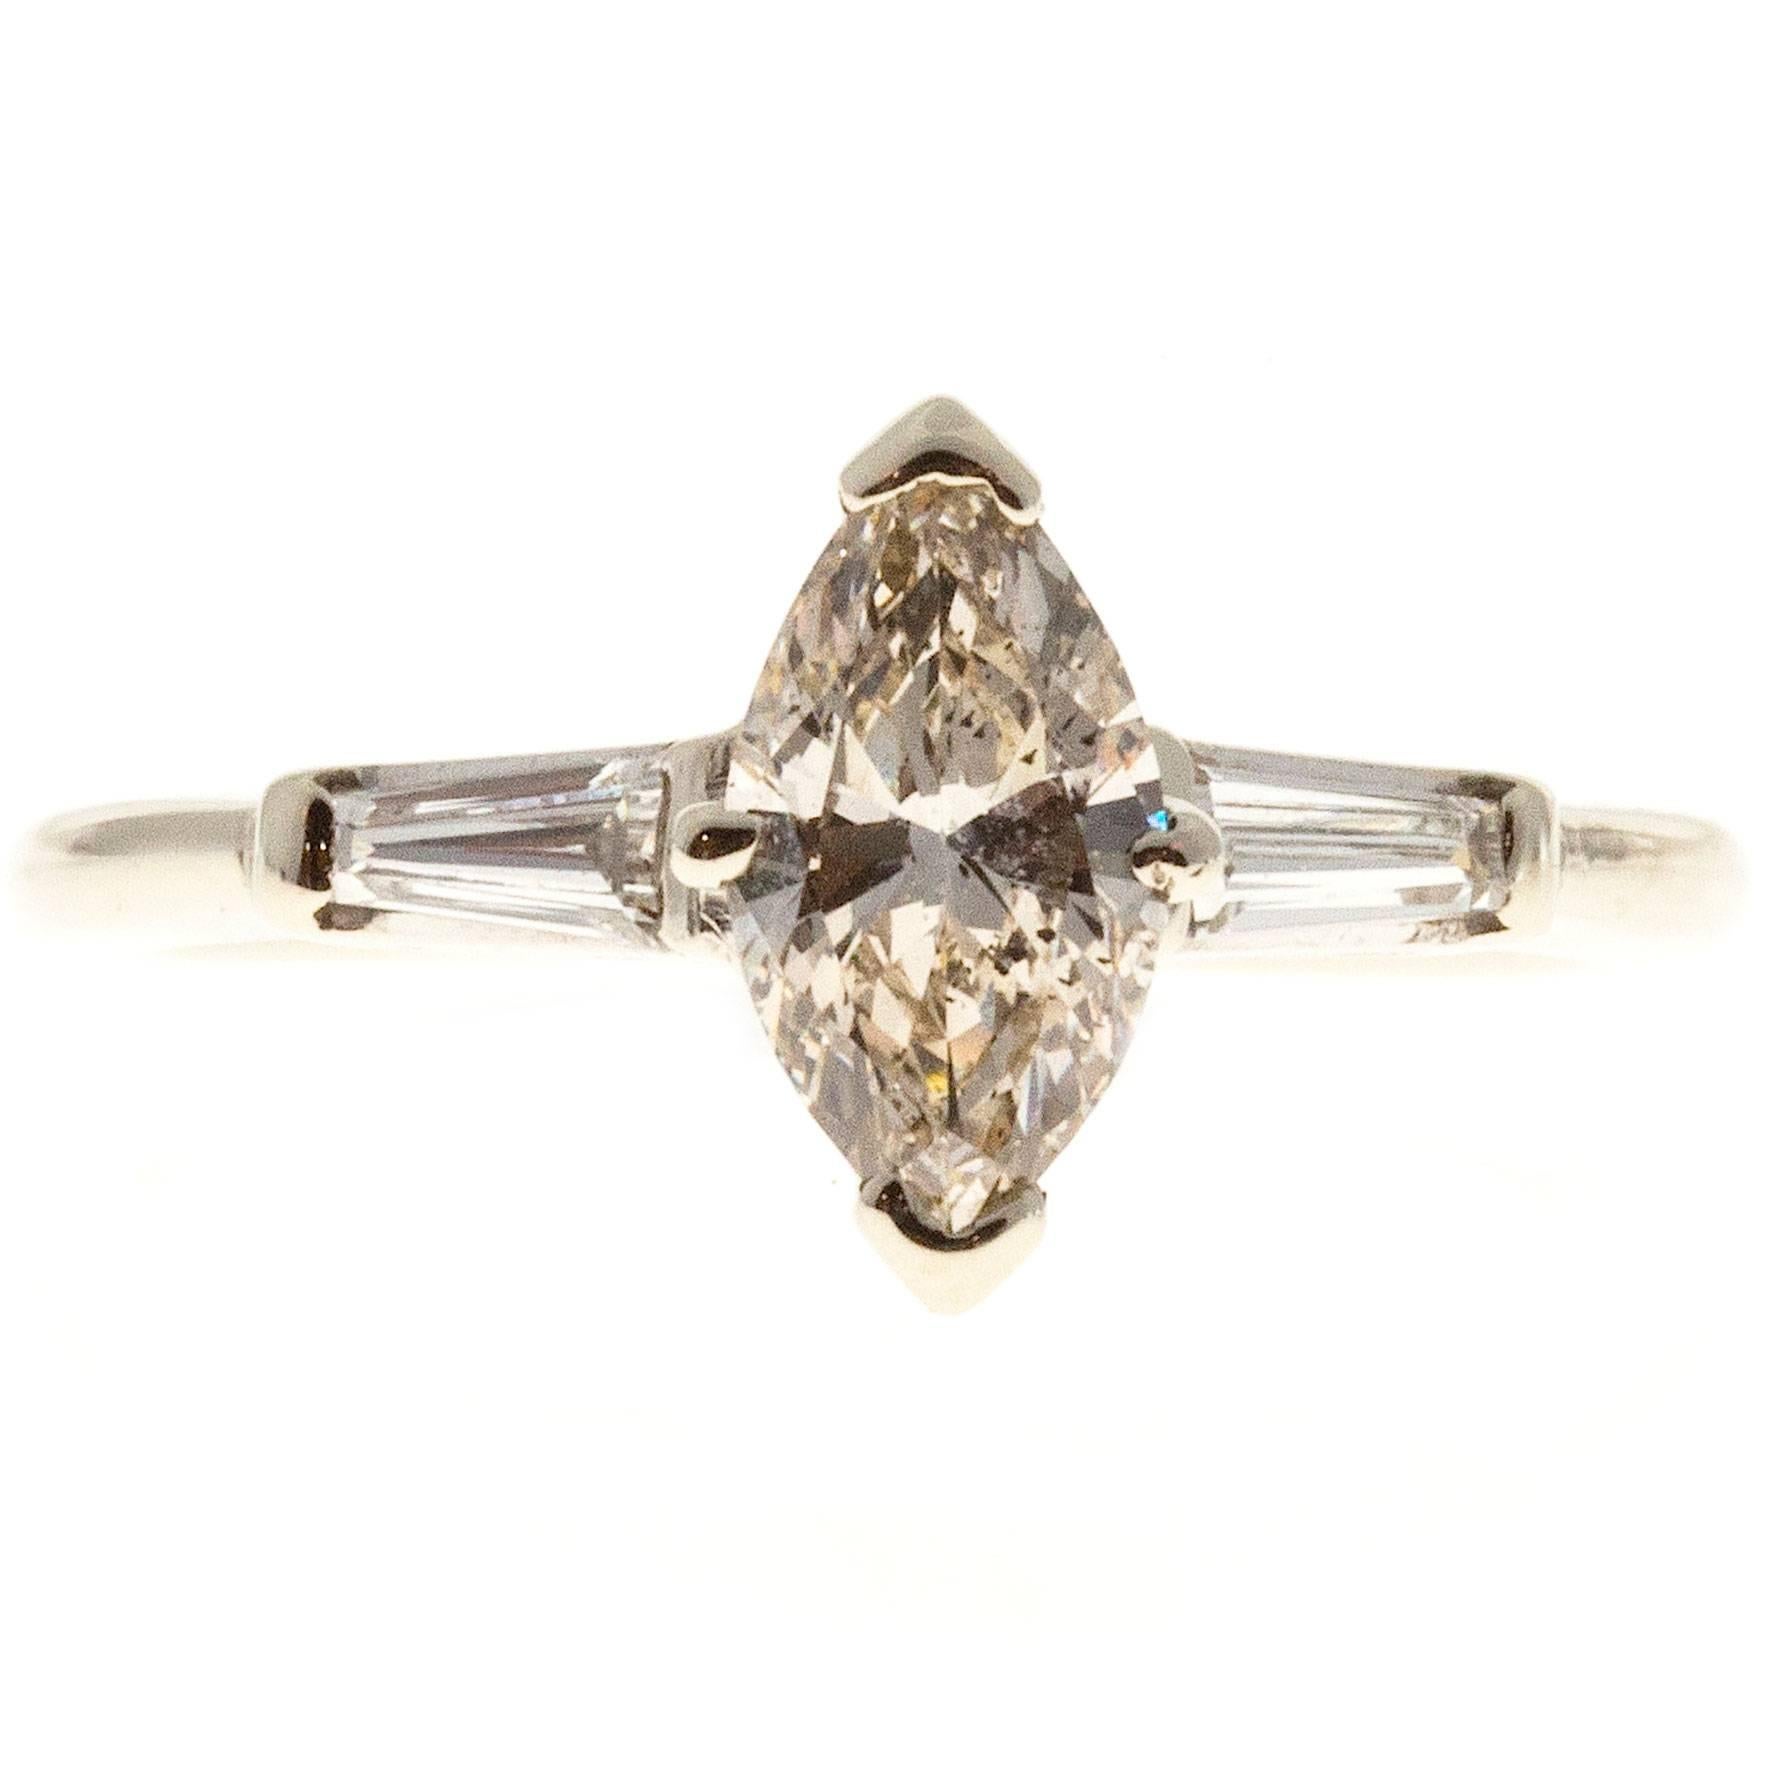 Natural faint brown Ideal cut Marquise and baguette diamond three-stone engagement ring. 14k white setting. All original 1950-1959. 

1 Marquise diamond approx. total weight .69cts, GIA certificate # 2125012813 Ideal cut. Depth: 60.2% Table: 61%.